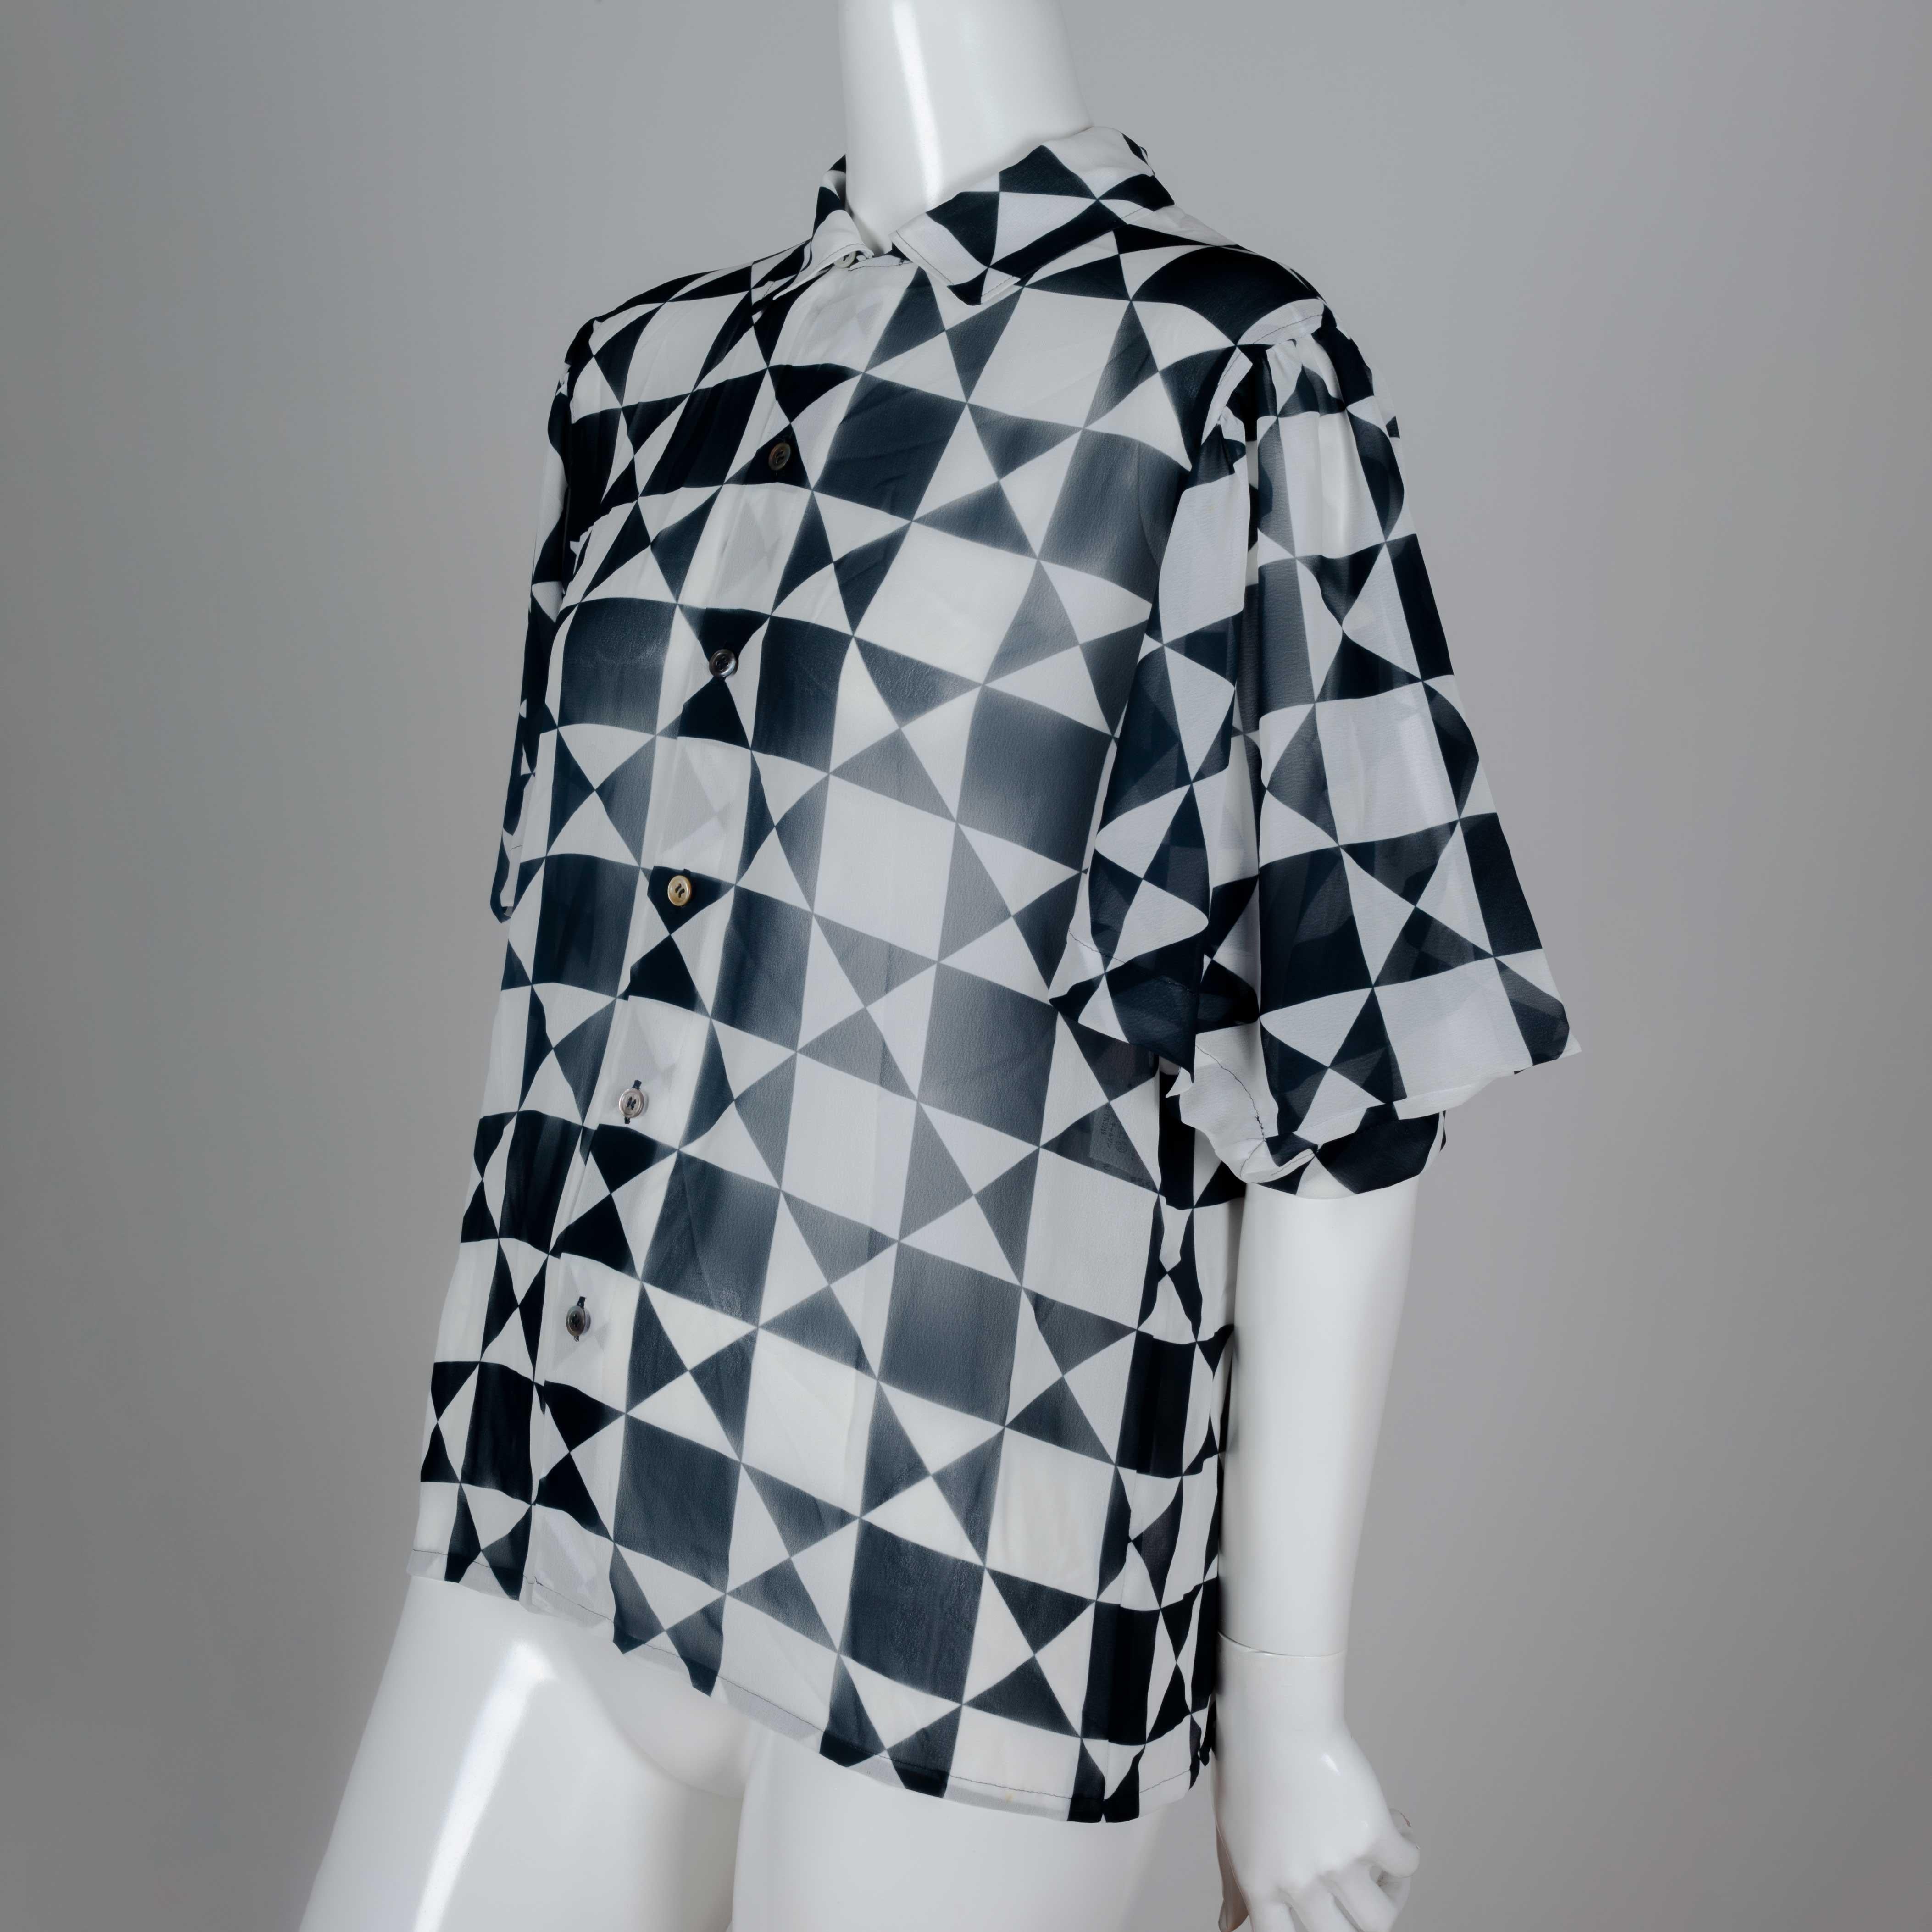 Comme des Garçons 1989 chiffon blouse from Japan with black and white geometric motif, short lantern sleeves and cut away collar. The boxy shape compliments the geometry of the print, and contrasts with the flowing material.    

YEAR: 1989
MARKED